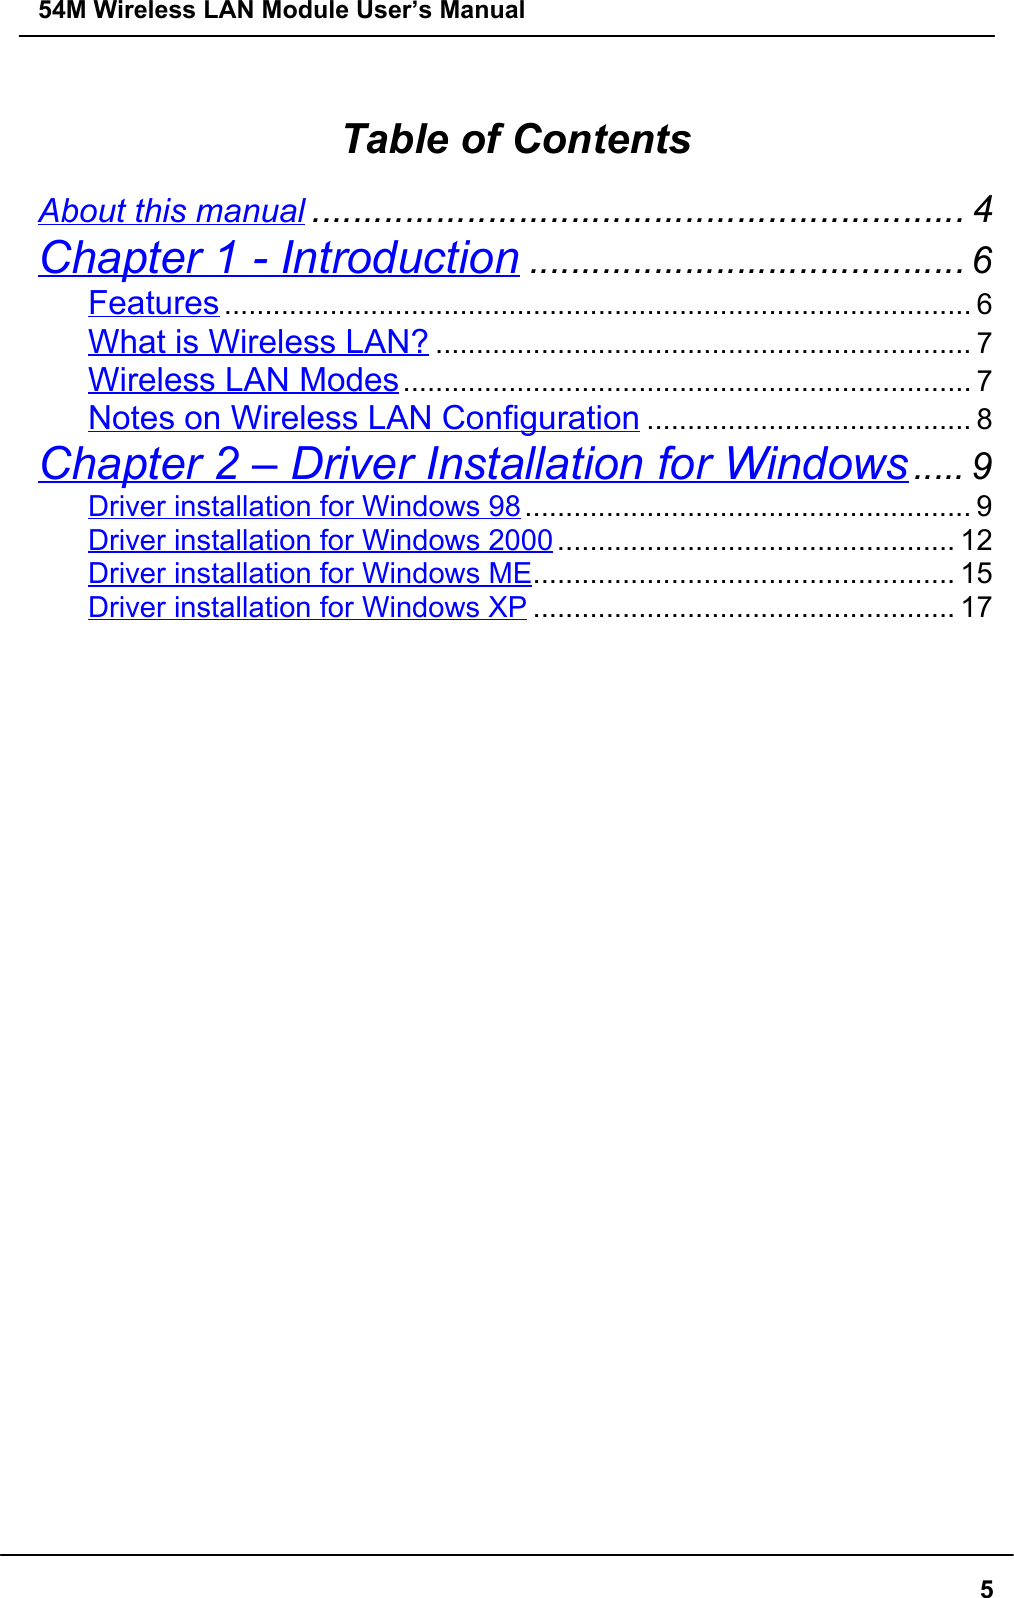 54M Wireless LAN Module User’s Manual5Table of ContentsAbout this manual ............................................................... 4Chapter 1 - Introduction .......................................... 6Features ............................................................................................ 6What is Wireless LAN? .................................................................. 7Wireless LAN Modes...................................................................... 7Notes on Wireless LAN Configuration ........................................ 8Chapter 2 – Driver Installation for Windows..... 9Driver installation for Windows 98....................................................... 9Driver installation for Windows 2000................................................. 12Driver installation for Windows ME.................................................... 15Driver installation for Windows XP .................................................... 17